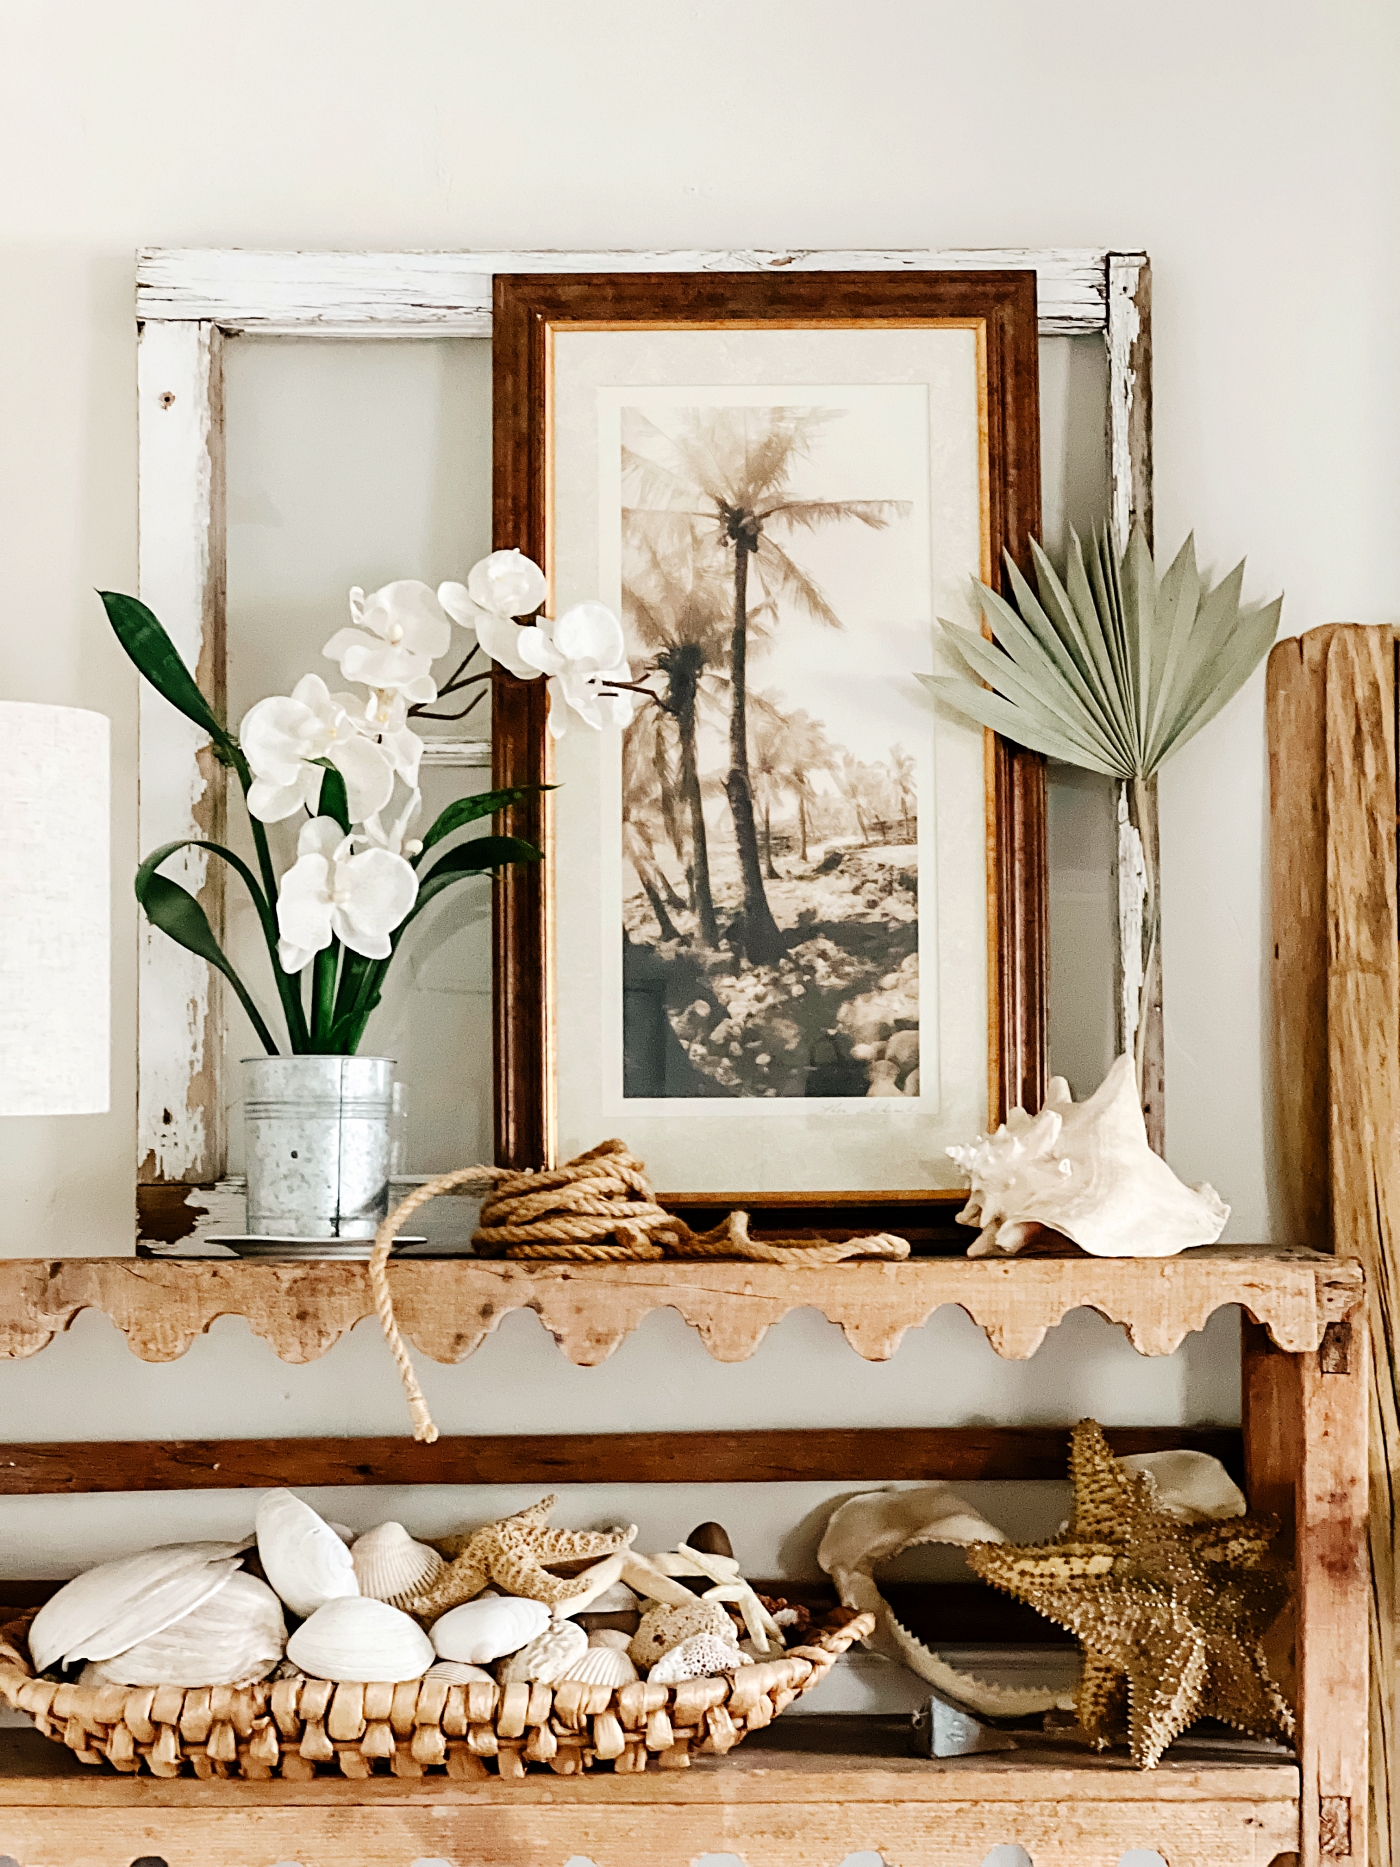 A Tropical Home Display – Shop this look!